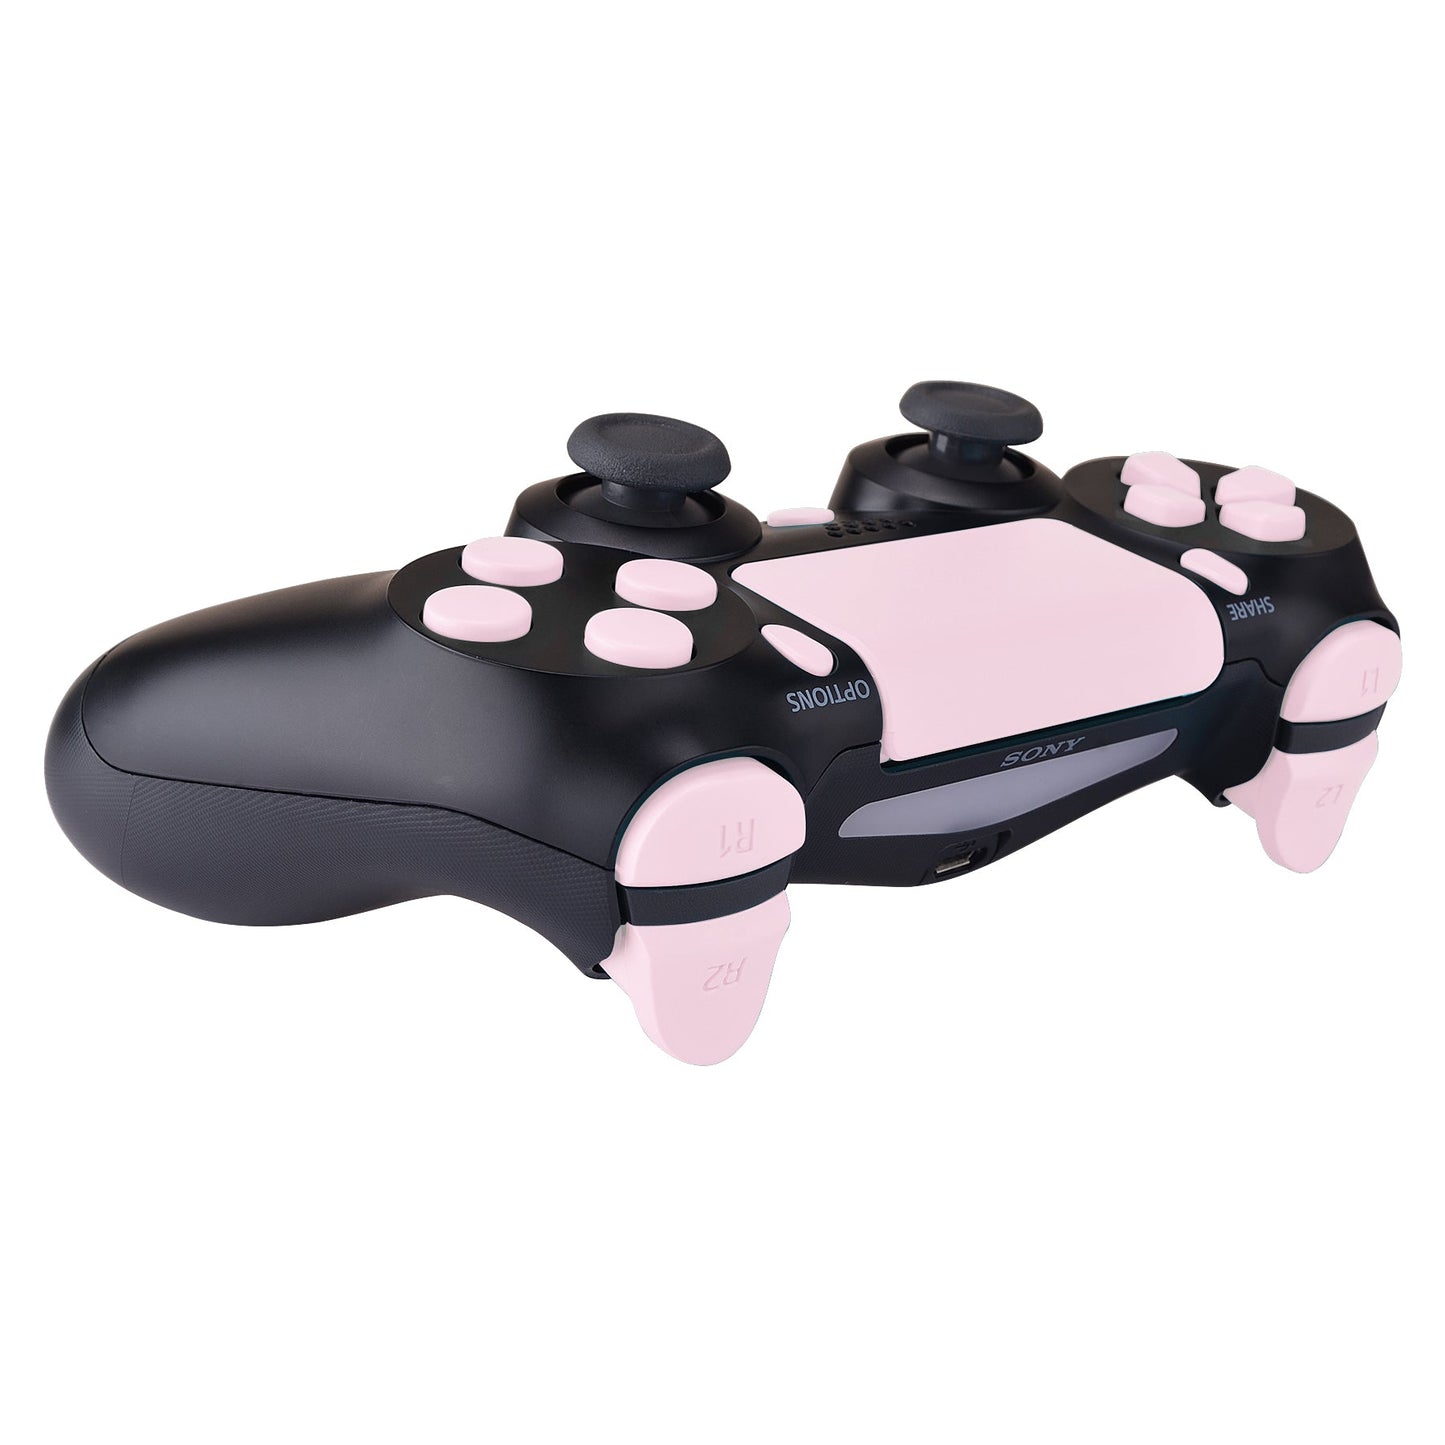 eXtremeRate Replacement for R2 Controller, R1 for Home – Slim Share Cherry D-pad Triggers Buttons Touchpad L1 eXtremeRate Options Controller Pro Set Buttons Kit Pink ps4 ps4 Full L2 Blossoms Repair Action